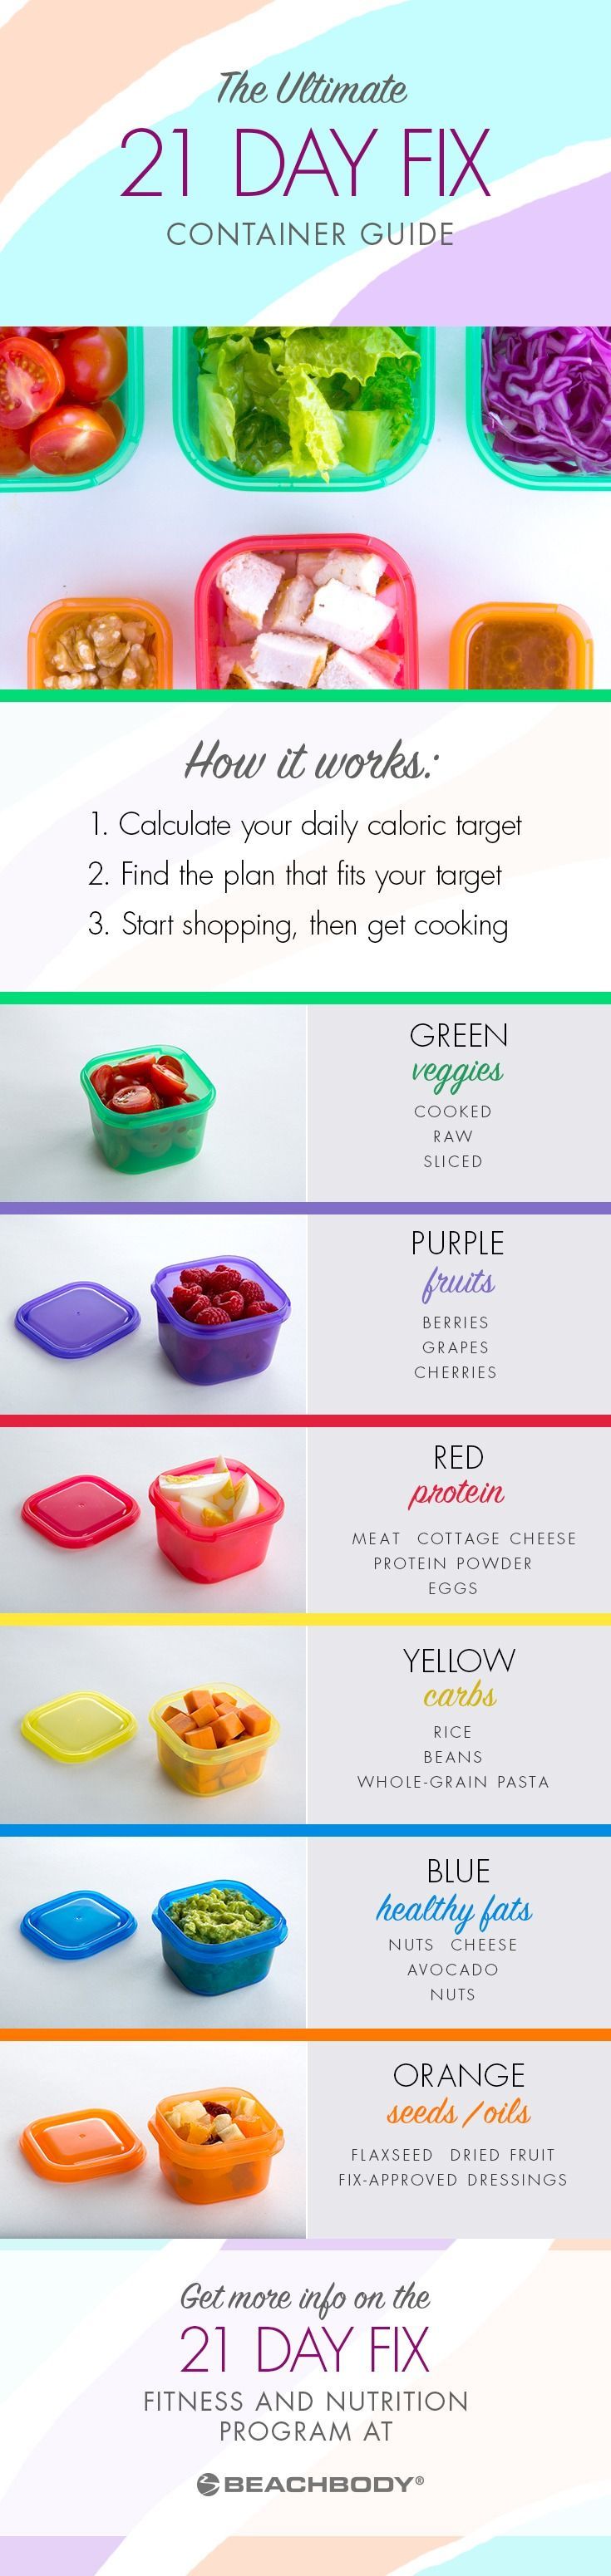 The 21 Day Fix containers makes meal planning and portion control easy and intuitive. Each color-coded container corresponds to a